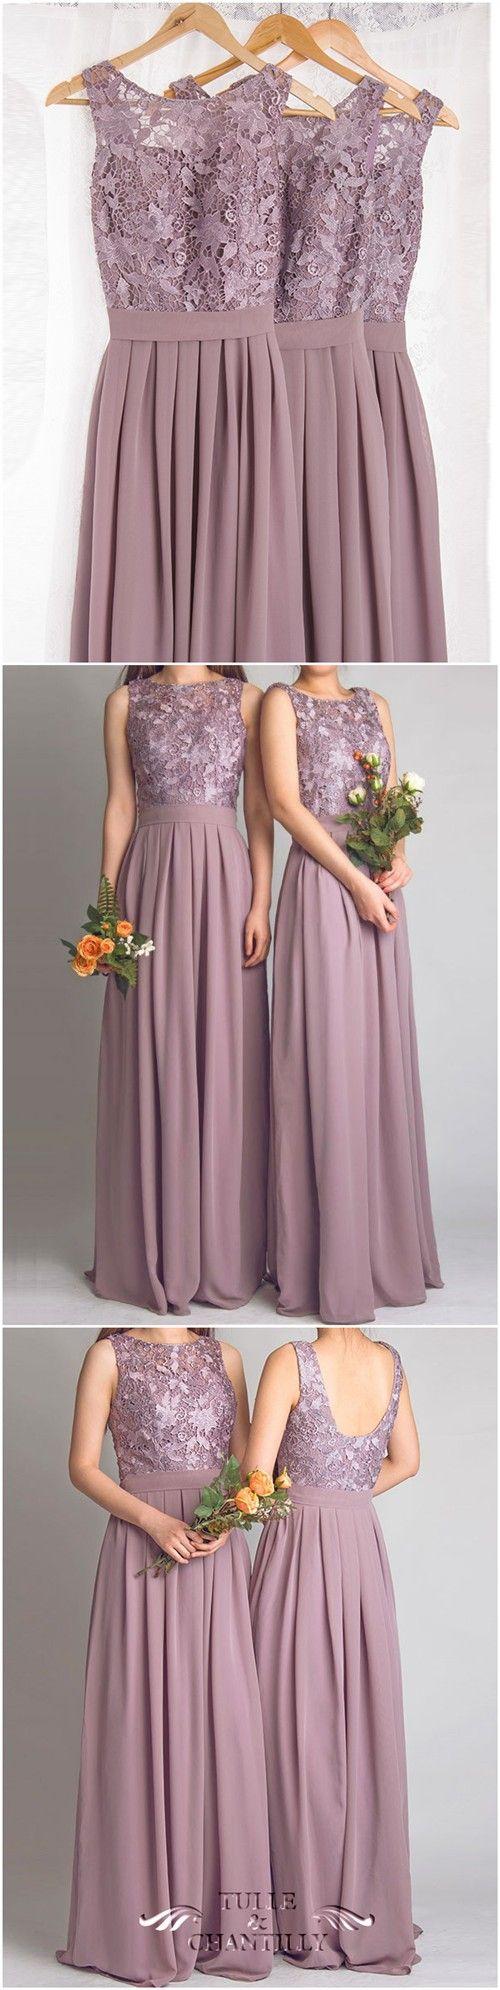 Mariage - Dramatic Vintage Lace Bridesmaid Dress With Flowing Chiffon Skirt [TBQP227] - $169.00 : Custom Made Wedding, Prom, Evening Dresses Online